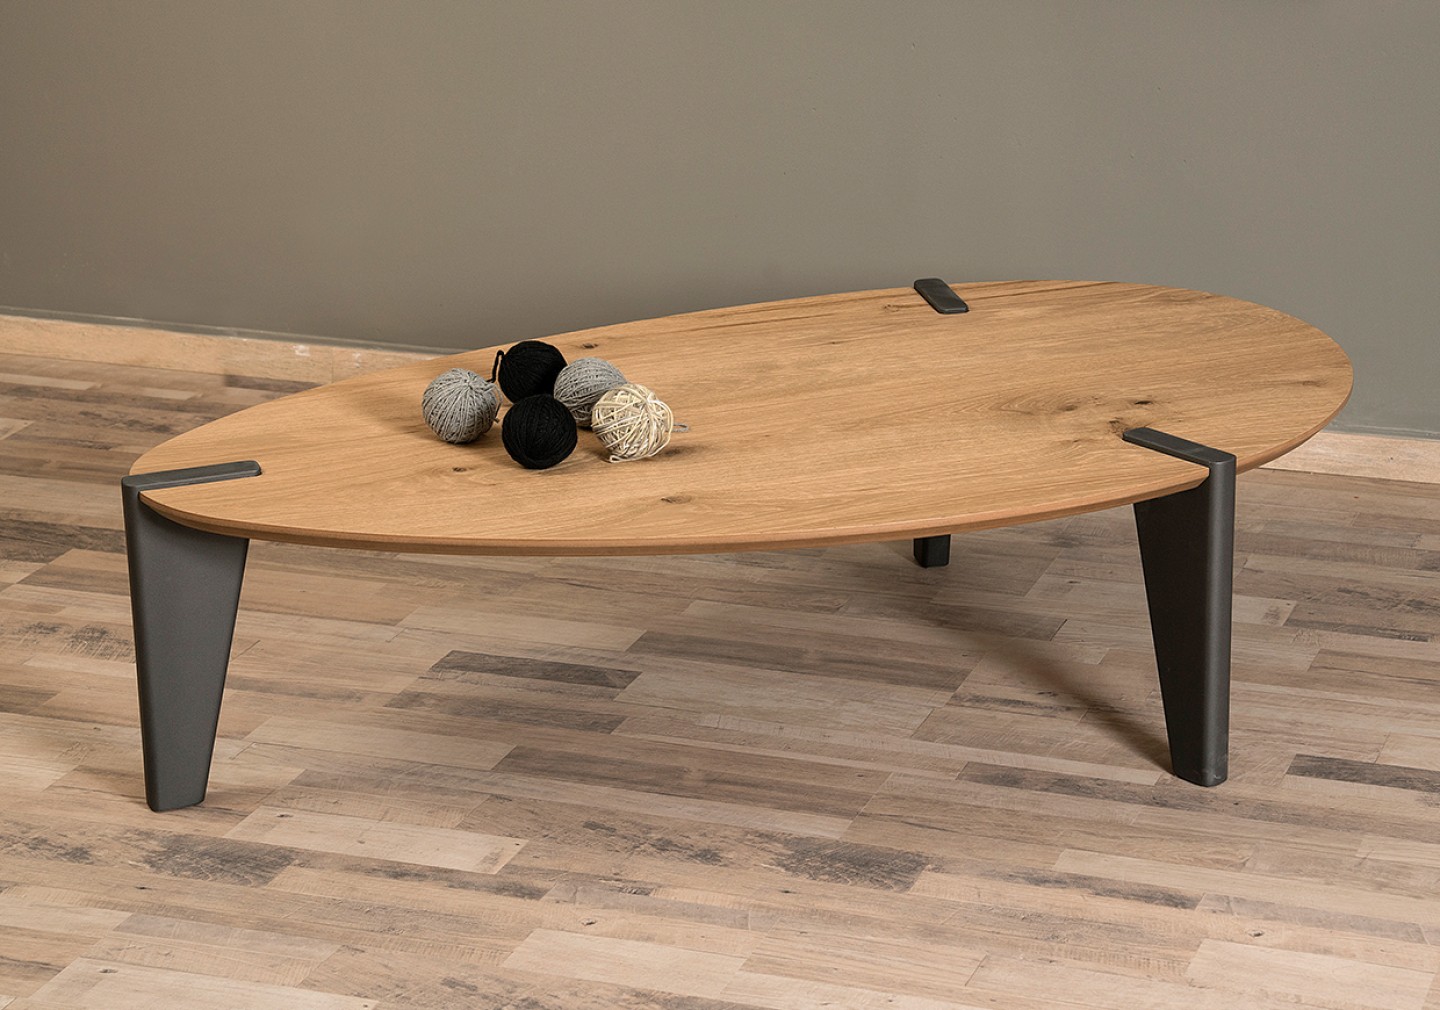 THE EARTH COFFEE TABLE